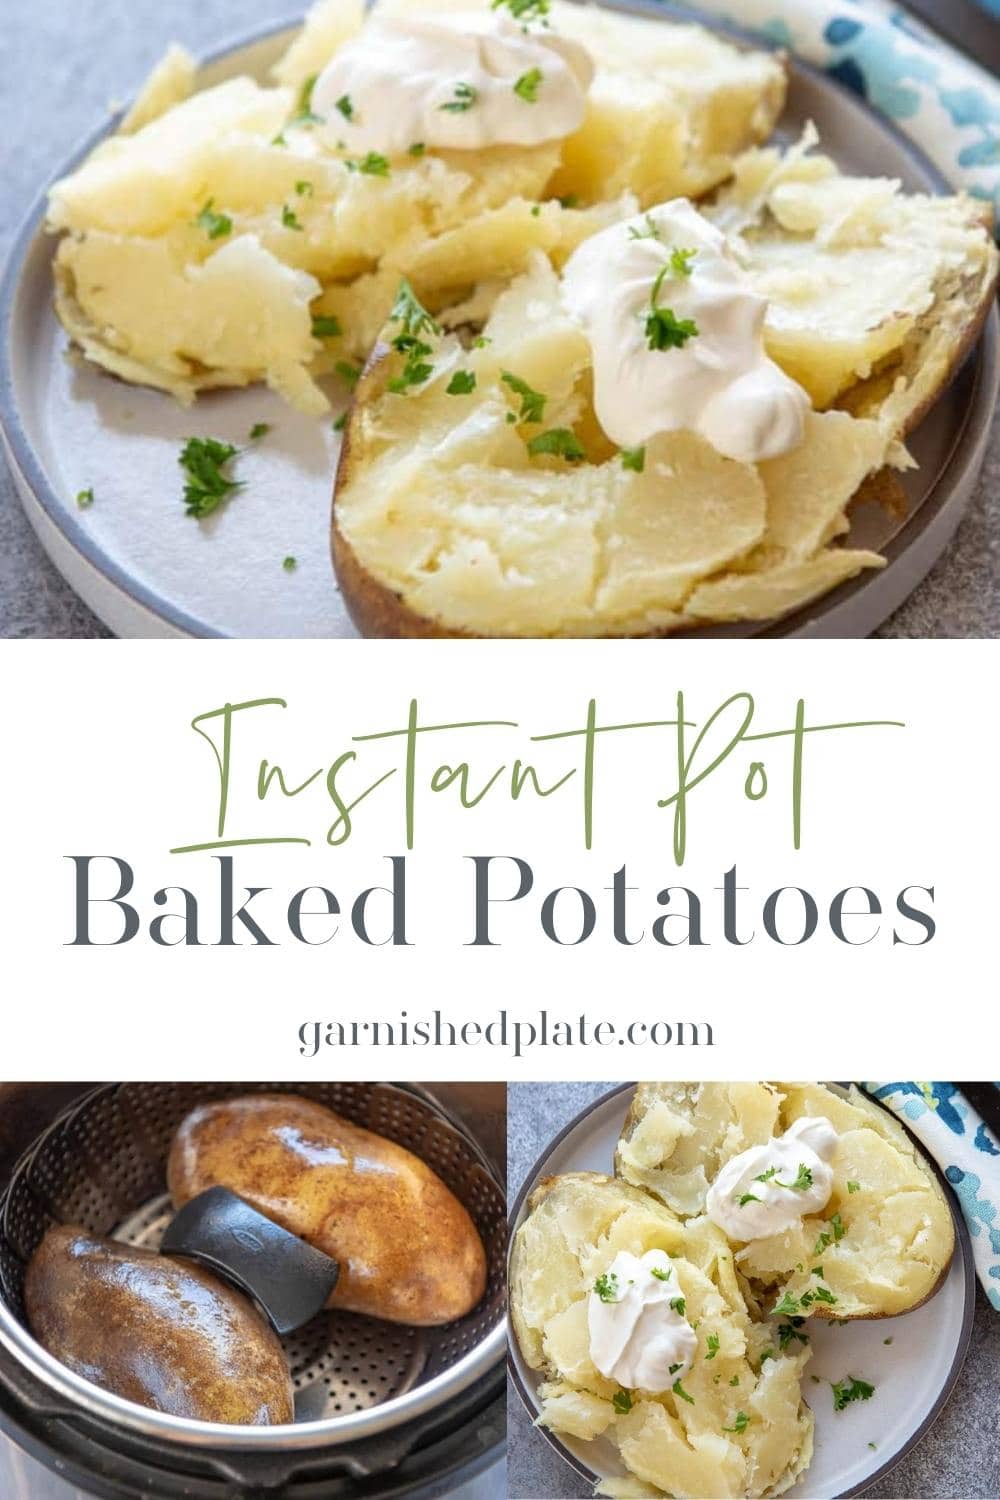 How to Make Baked Potatoes in an Instant Pot - Garnished Plate